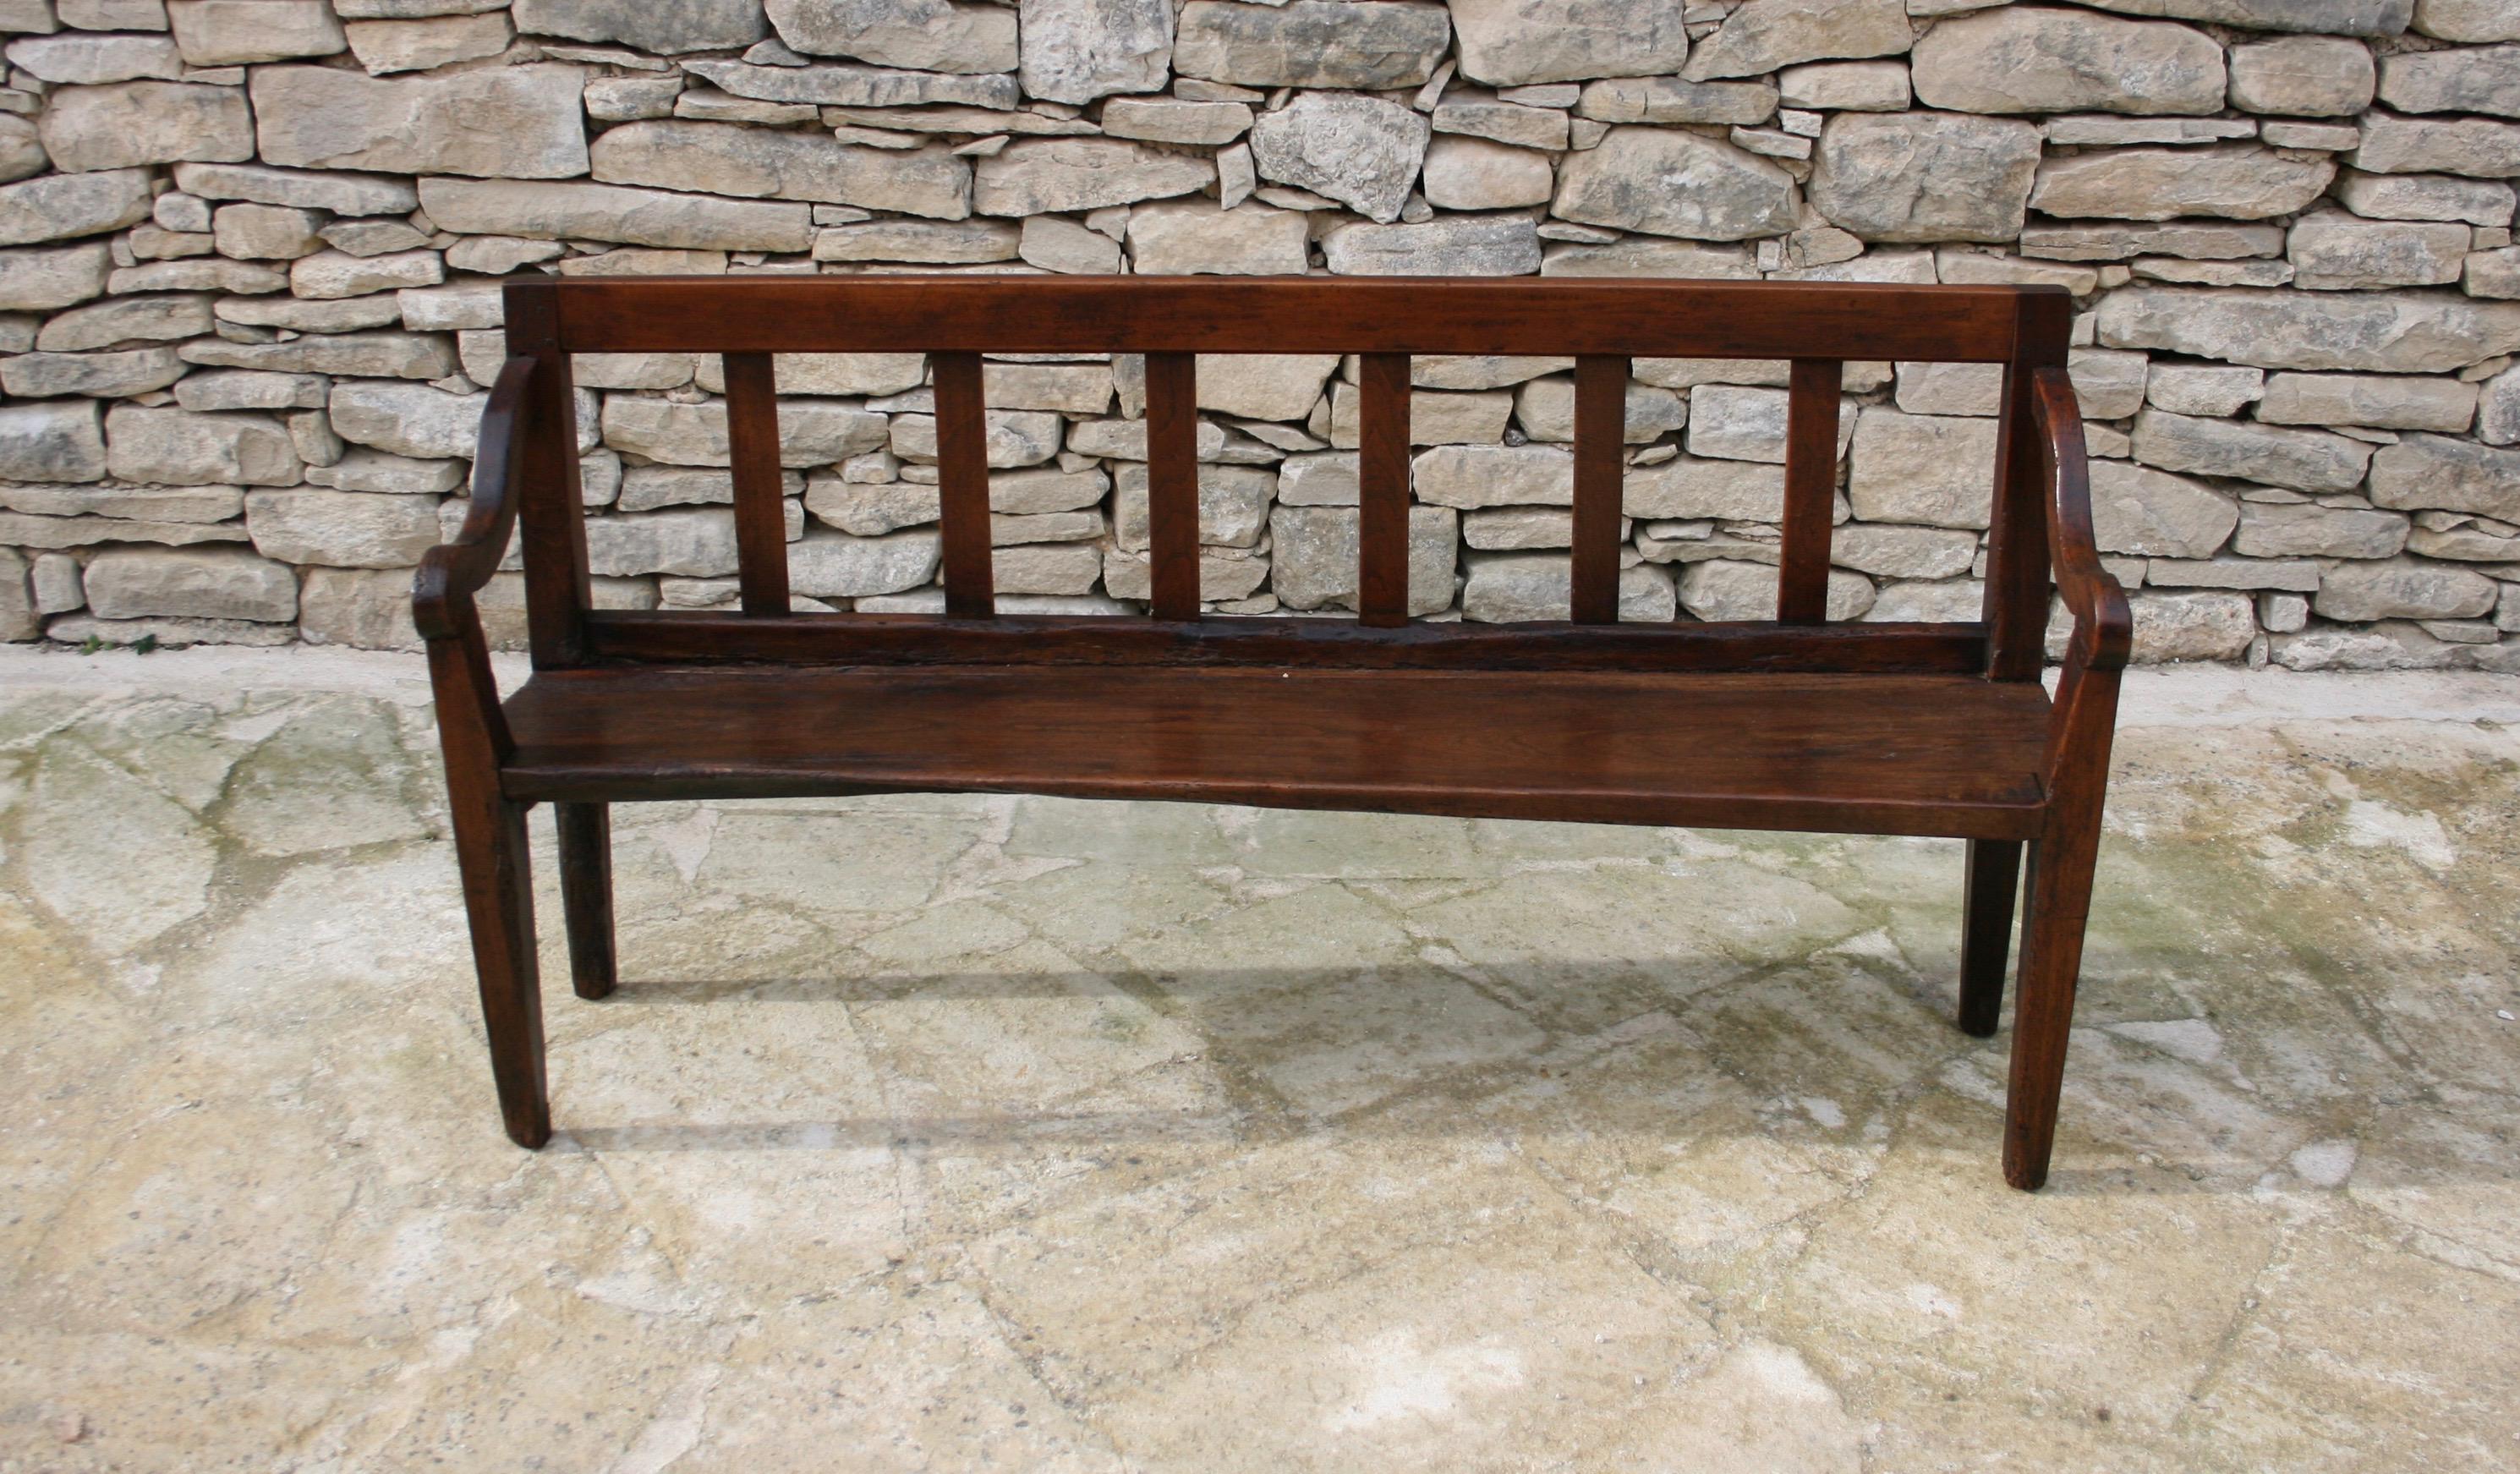 A delightful example of English country house furniture, a wonderfully proportioned small hall bench. Made from a mix of both chestnut and walnut, the piece has wonderful age and patina. Would work equally well in a boot or mud room or hallway or